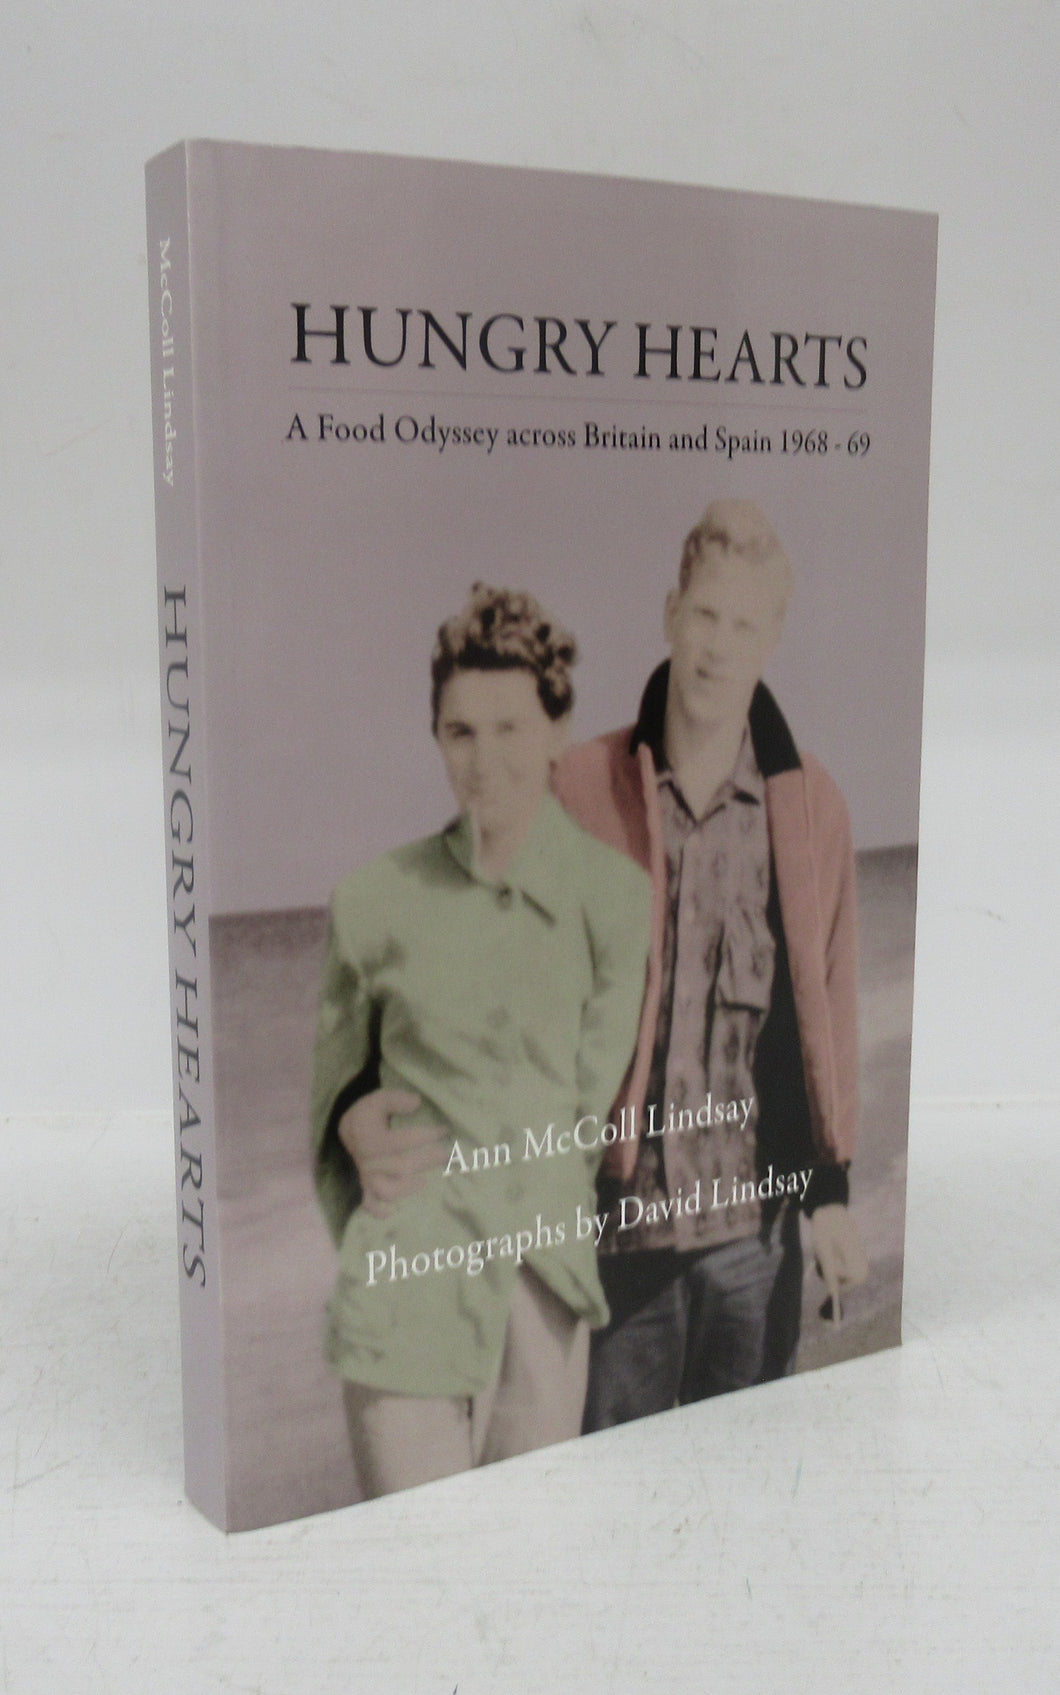 Hungry Hearts: A Food Odyssey across Britain and Spain 1968-69